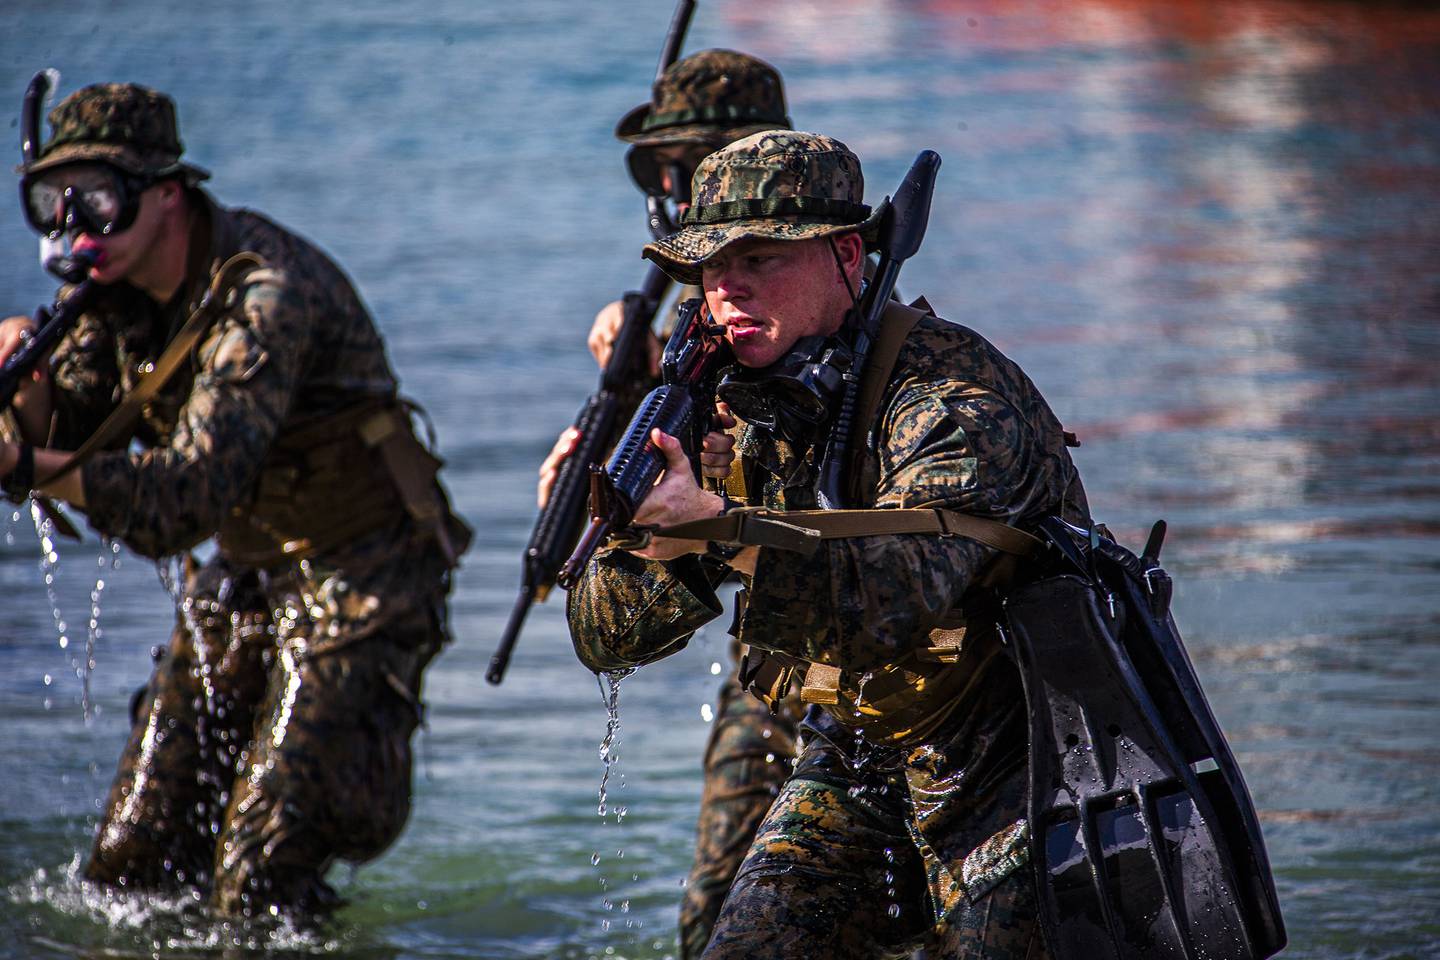 Marines hit the shore during an amphibious assault exercise on Marine Corps Base Hawaii, April 28, 2020.